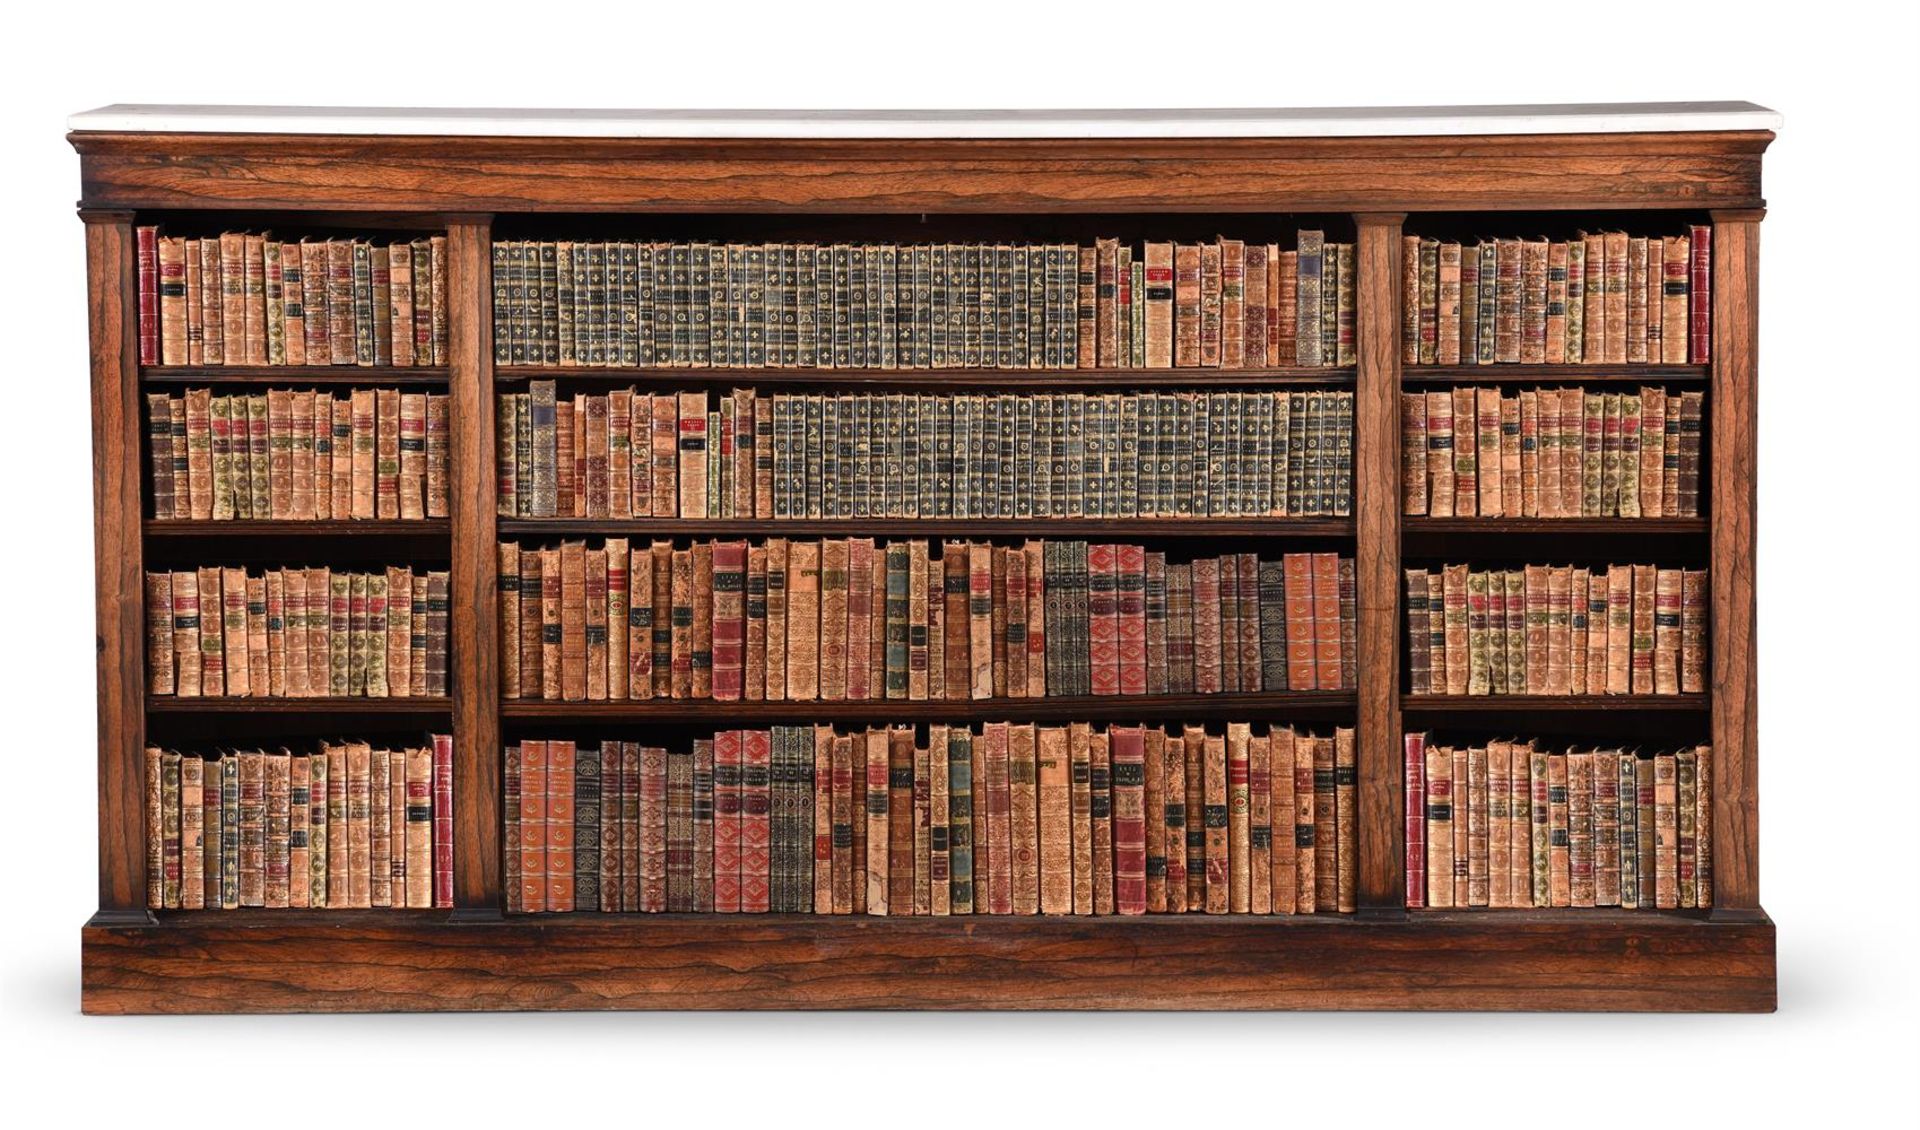 Y A ROSEWOOD OPEN BOOKCASE, IN EARLY 19TH CENTURY STYLE, 20TH CENTURY